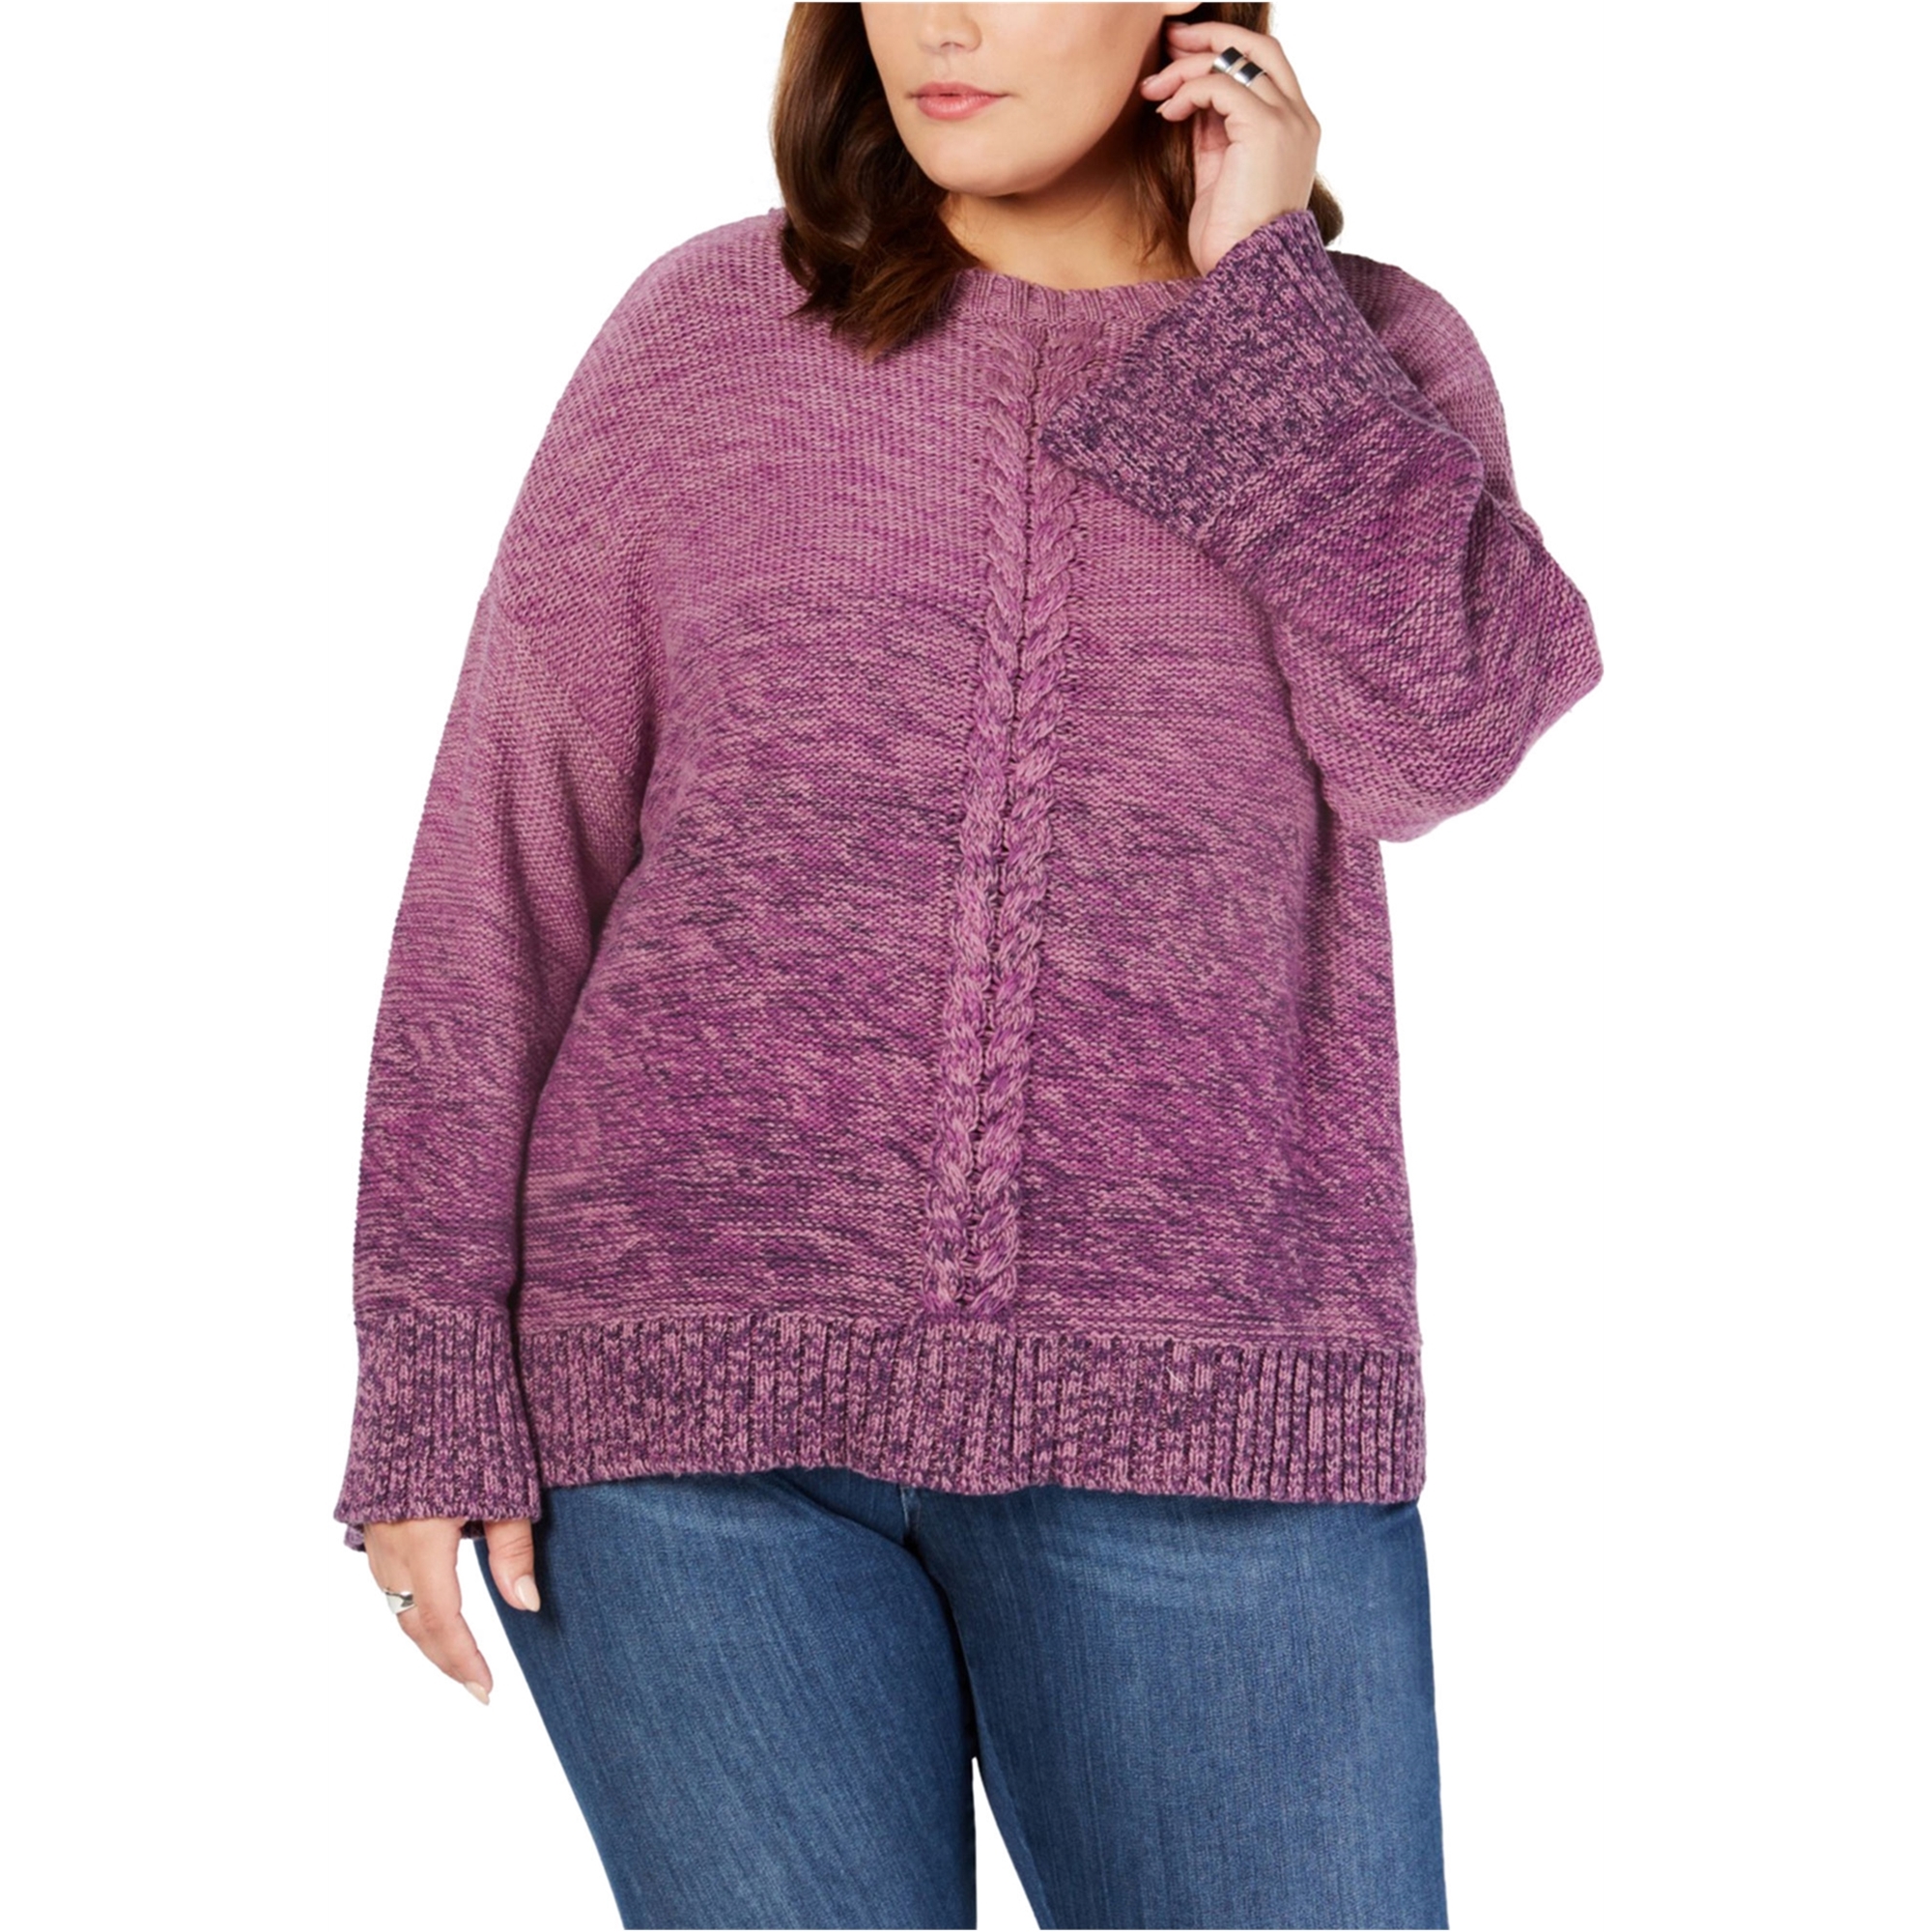 Style & Co. Womens Marl Braid Pullover Sweater, Purple, 3X - image 1 of 2